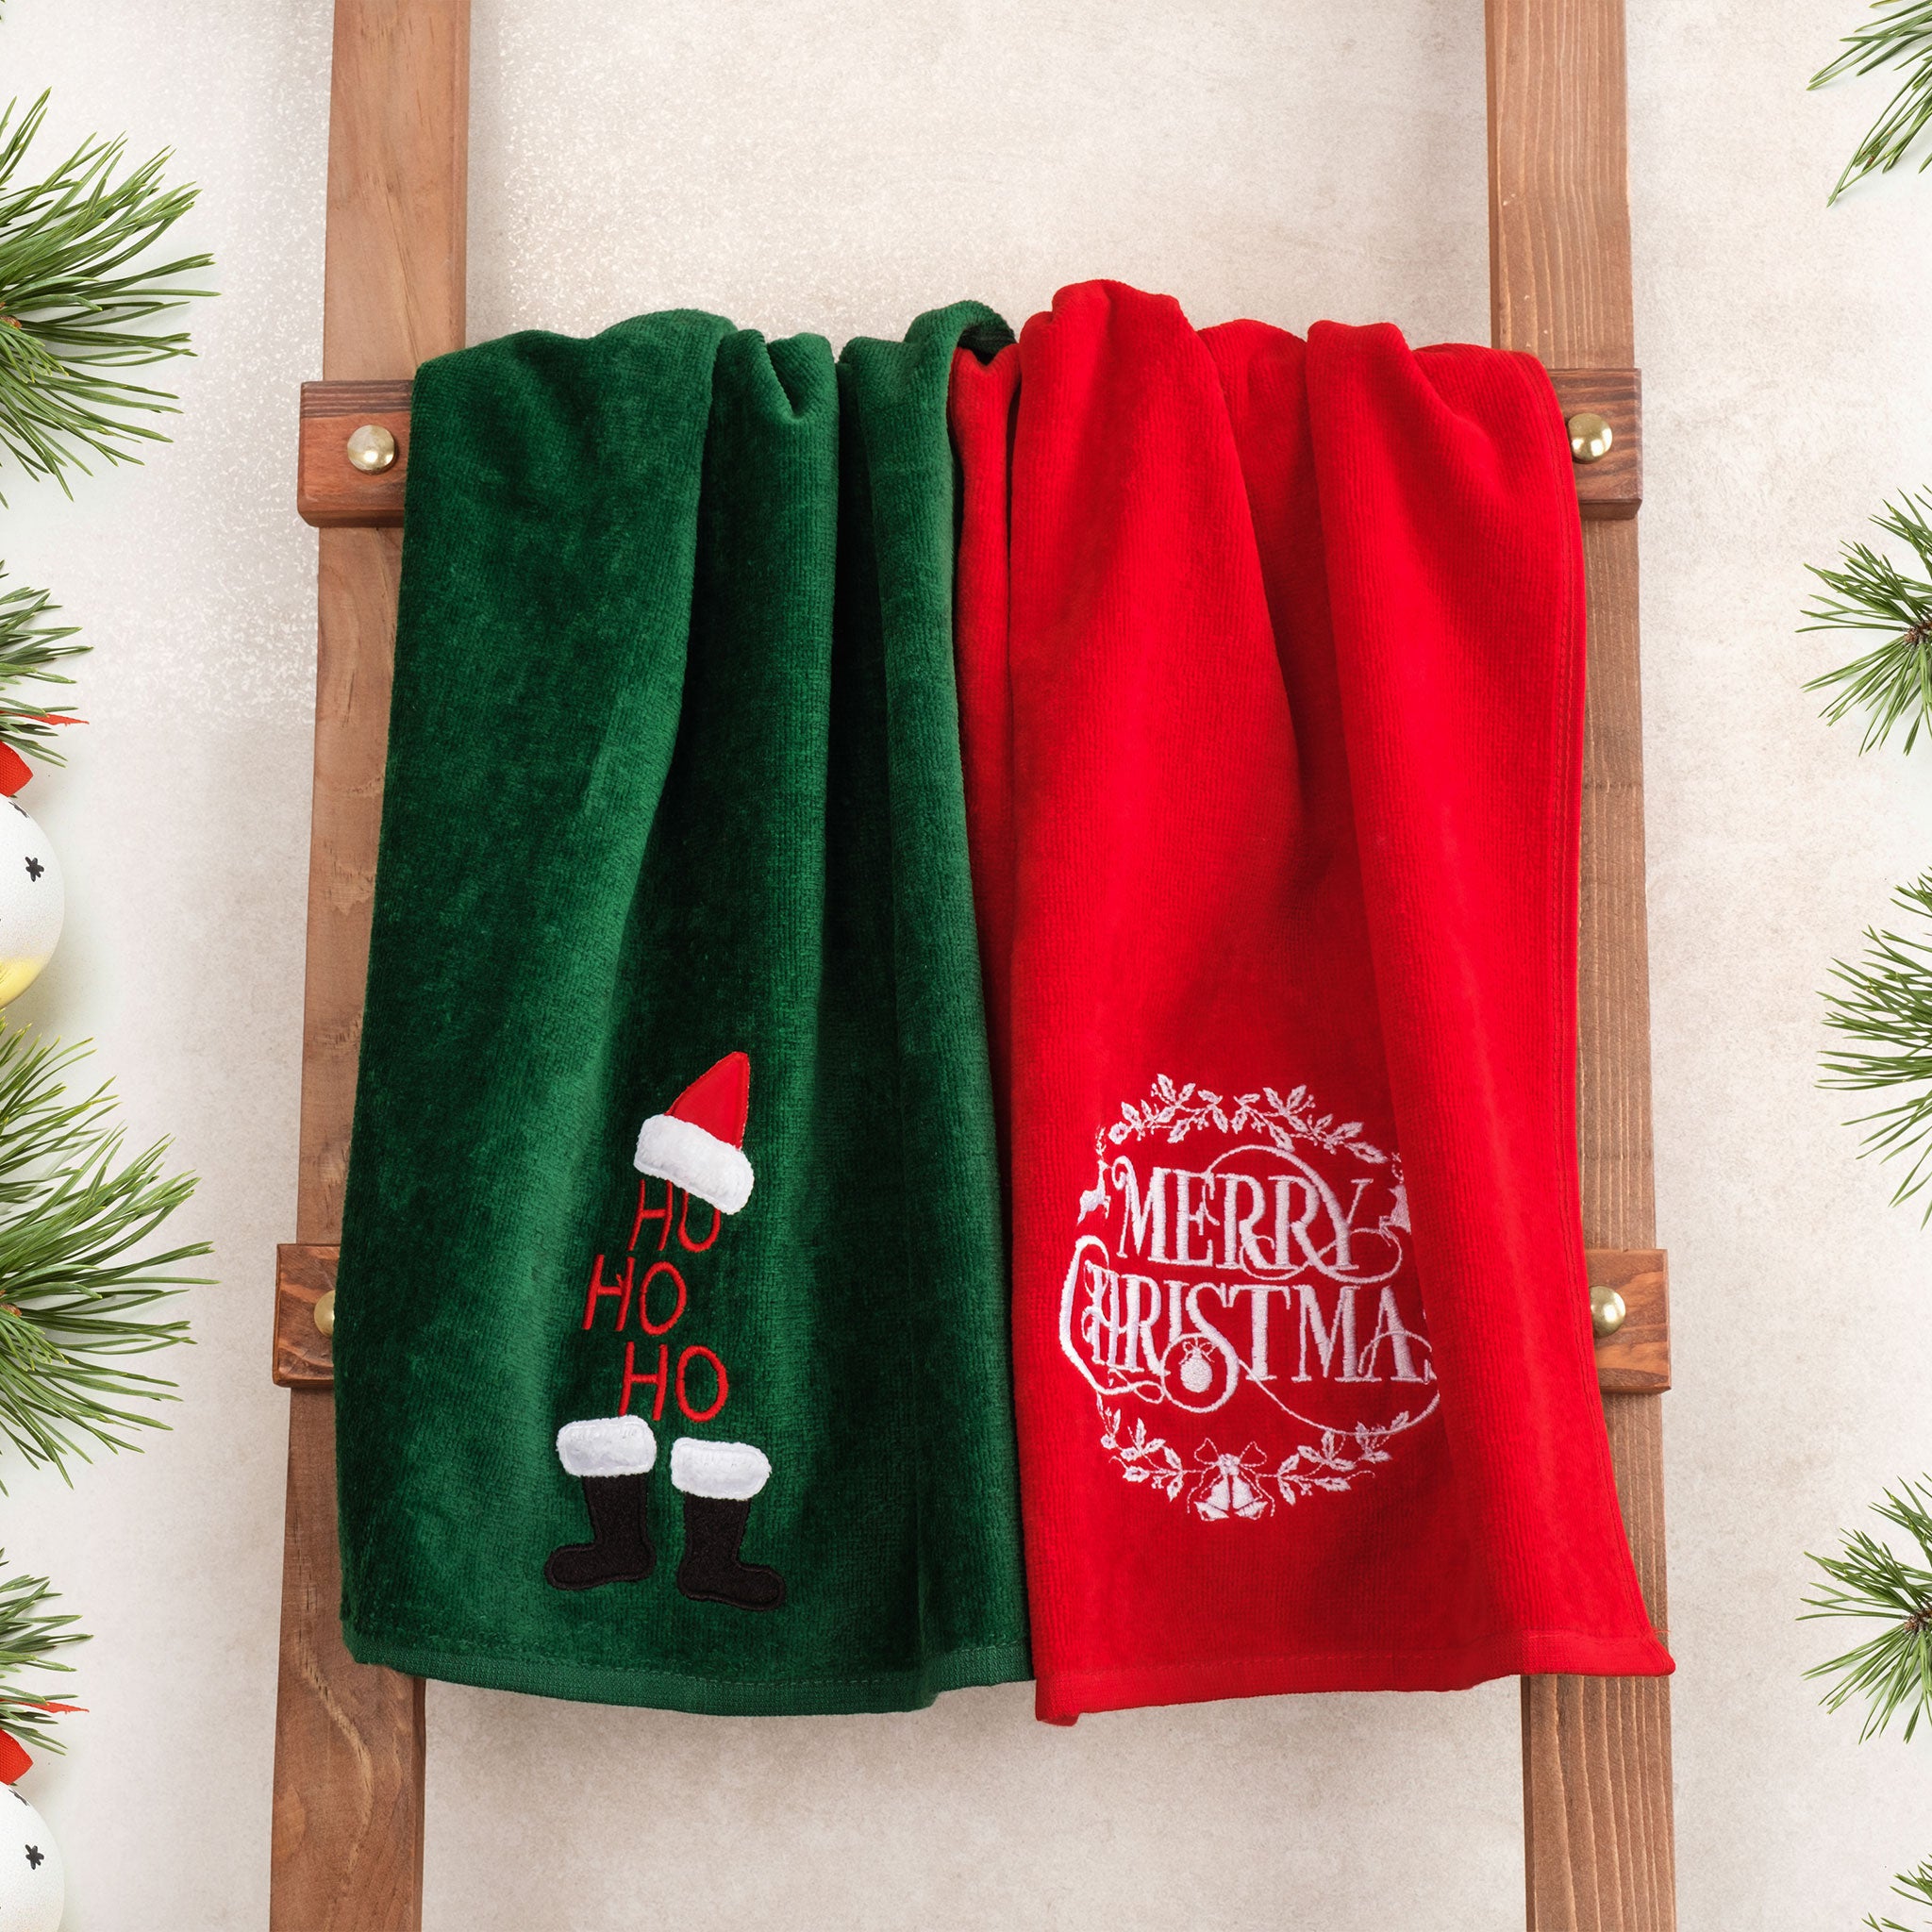 American Soft Linen - Christmas Towels 2  Packed Embroidered Towels for Decor Xmas - 60 Set Case Pack - Merry-Hoho - 3